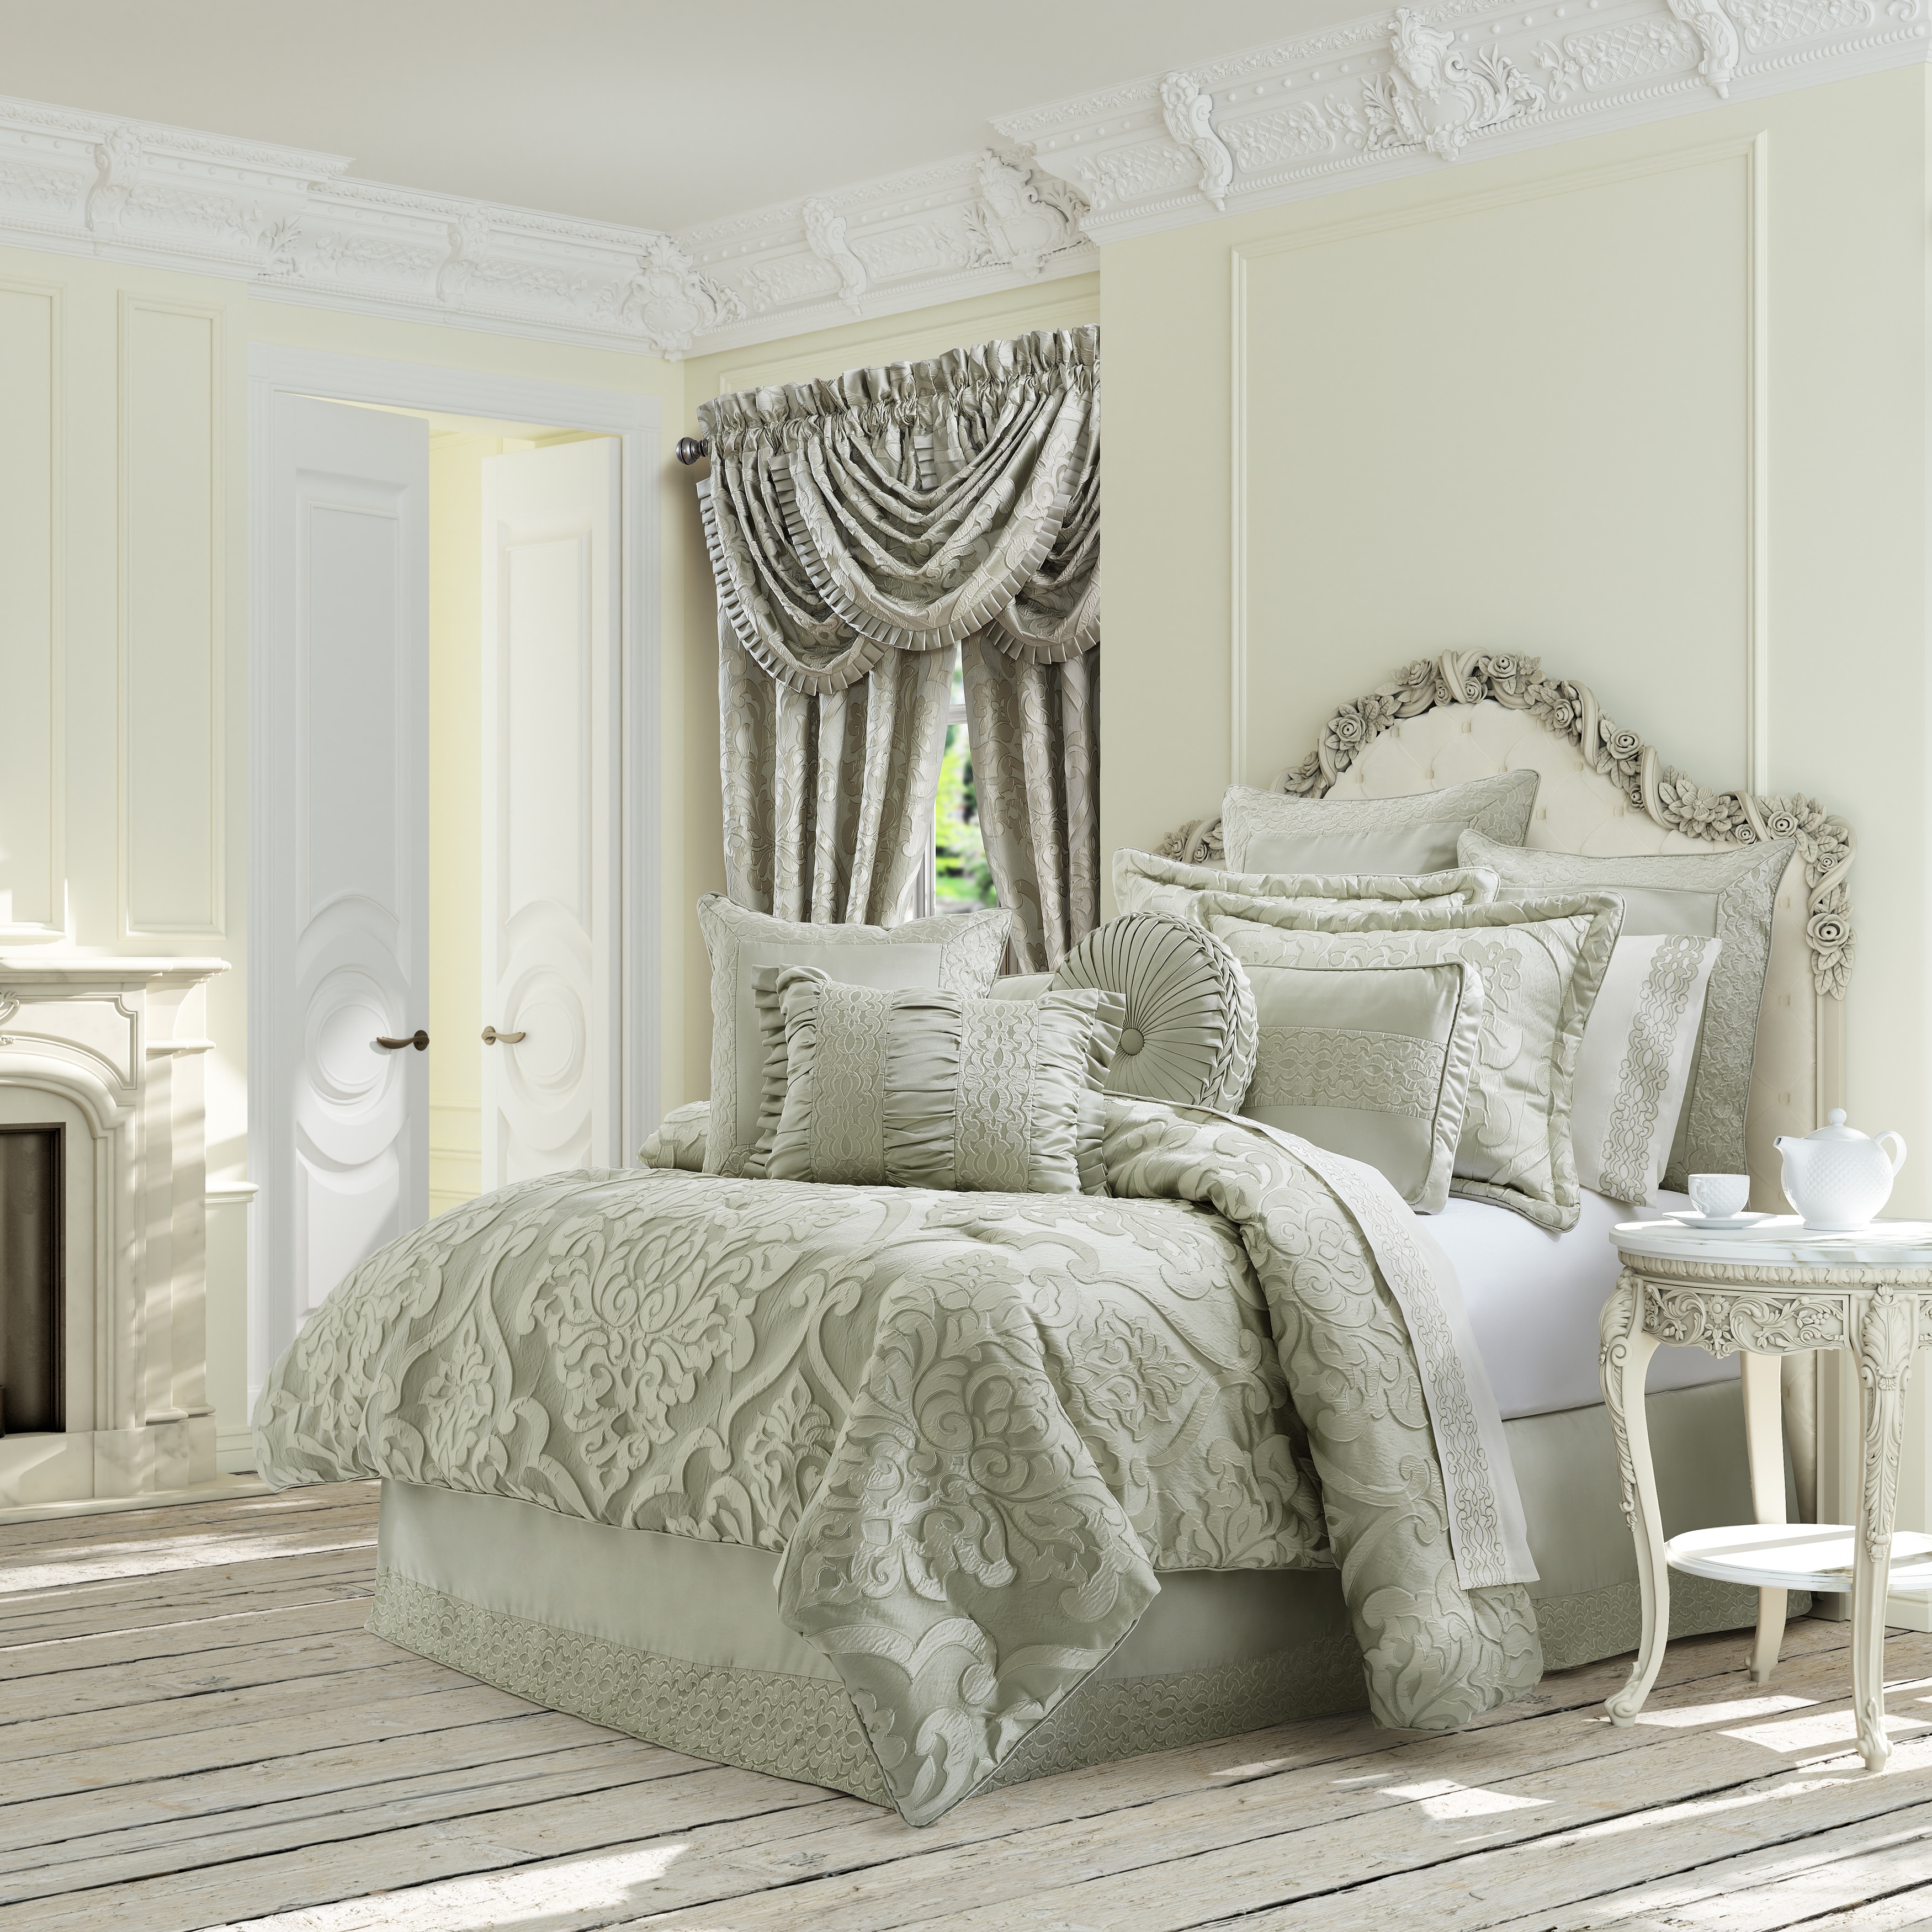 Chenille J. Queen New York Comforters and Sets - Bed Bath & Beyond